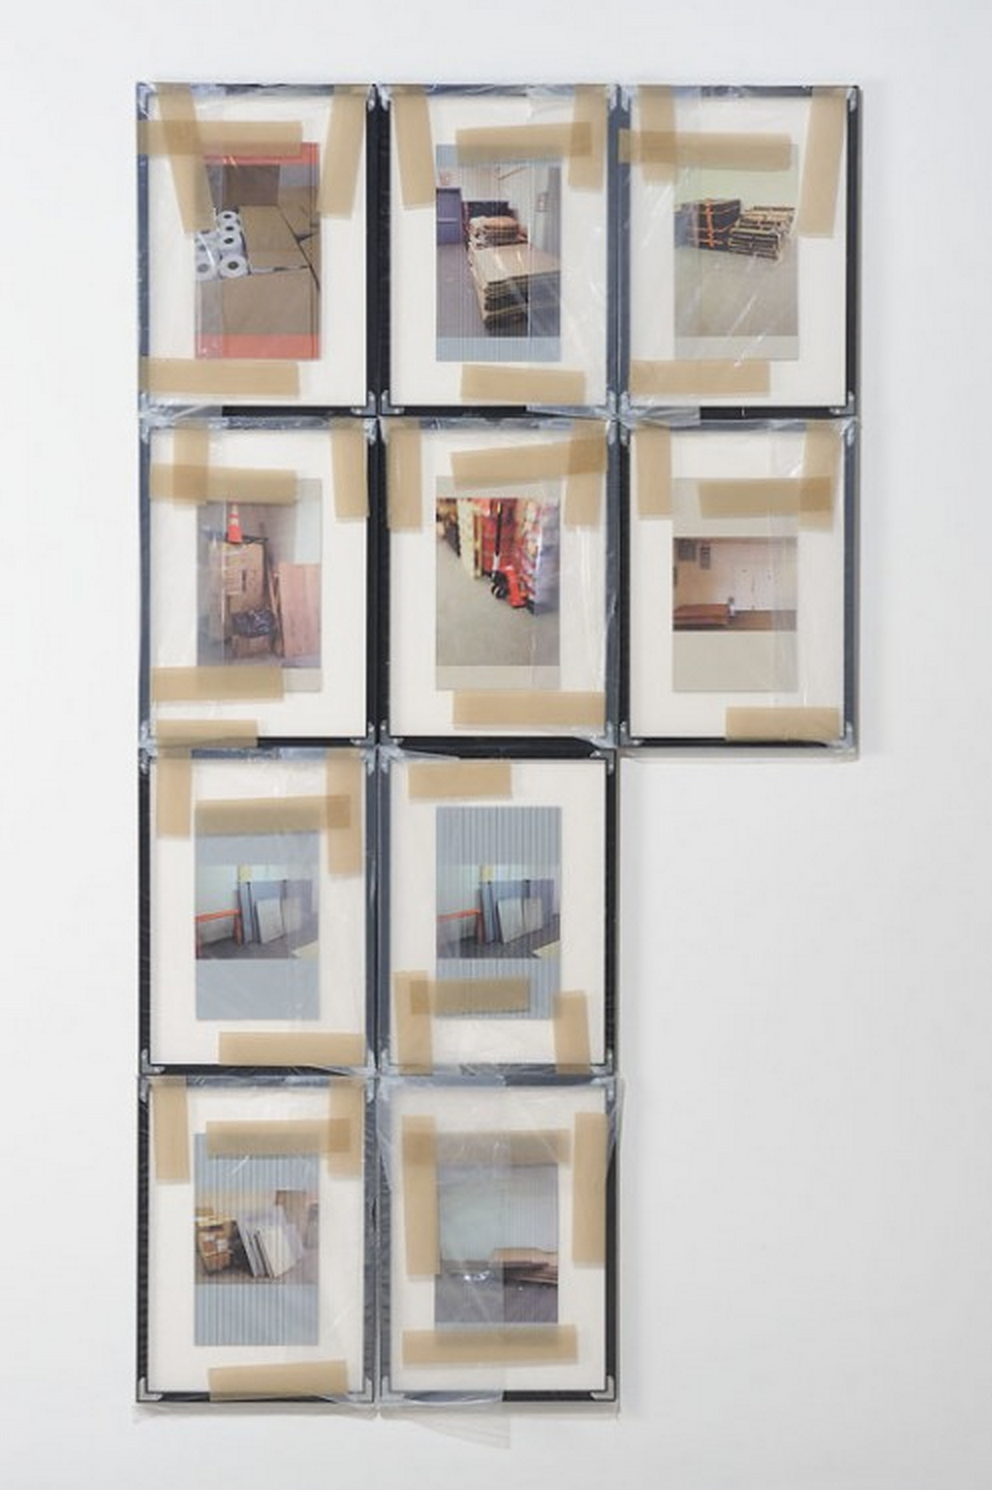 "Untitled," 2014. UV curable ink on styrene in frame, wrapped in Polyester with tape. Set of 10 photographs, 18 1/4 x 13 1/4 inches each. Courtesy of Jessica Silverman Gallery.